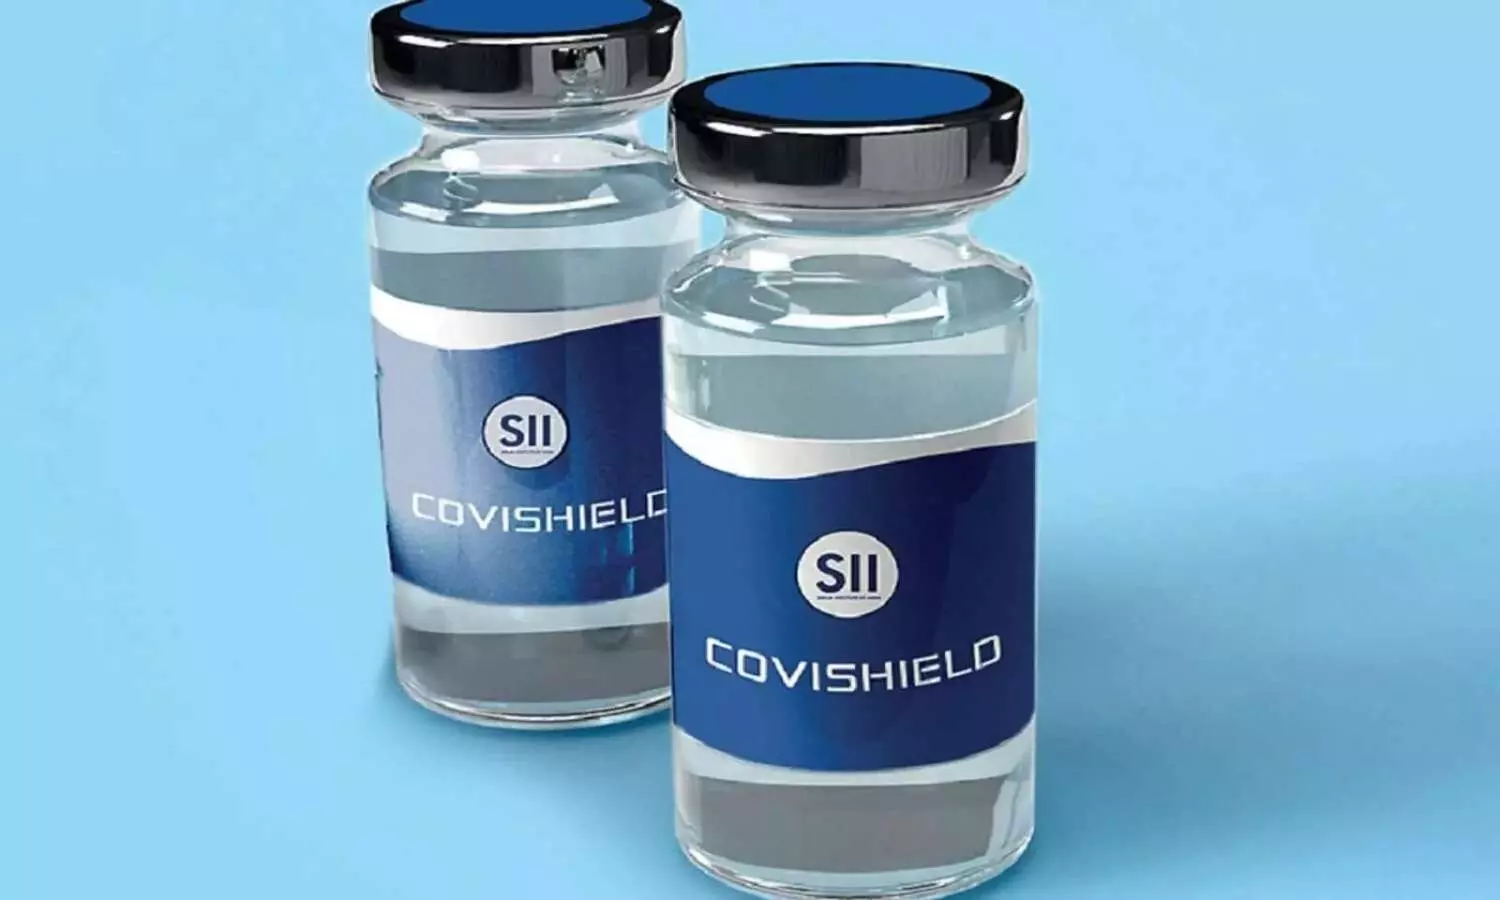 Covishield even worse in terms of cardiovascular effects, heart attacks and strokes, claims leading British Indian Cardiologist